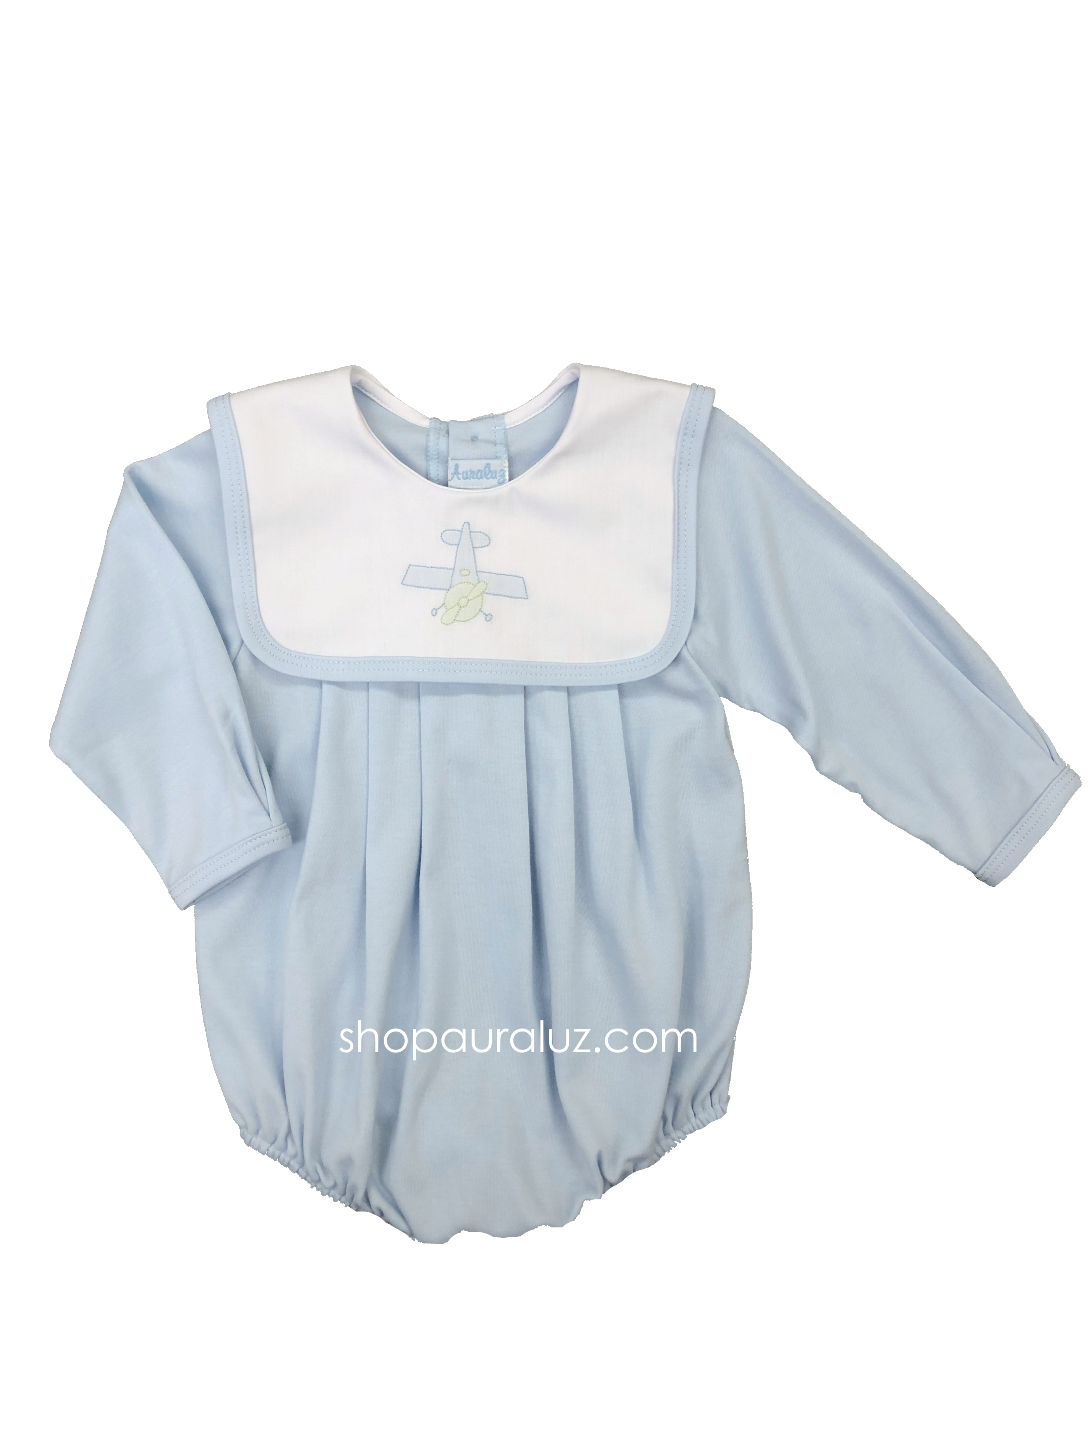 Auraluz Knit Boy Bubble, l/s...Blue with white square collar and embroidered airplane